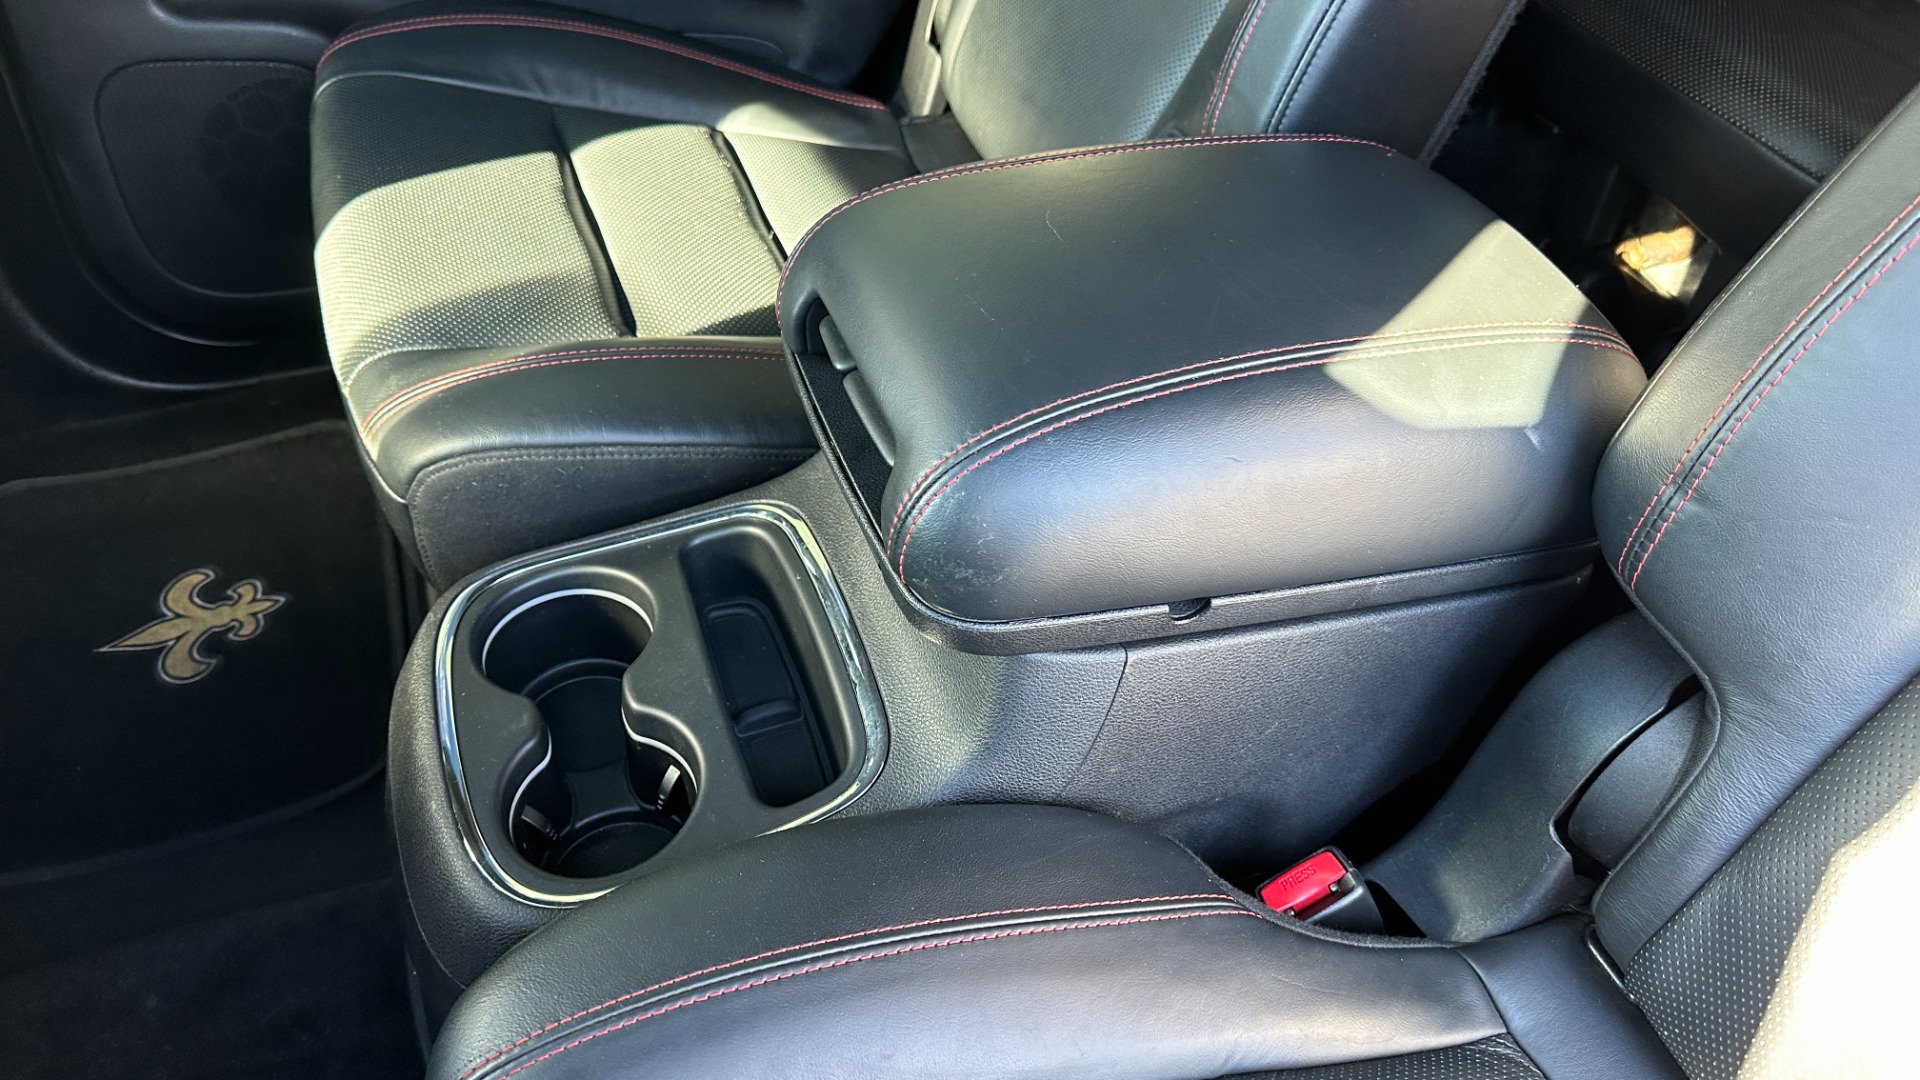 Used 2015 Dodge Durango R/T / HEMI V8 / CAPTAINS CHAIRS / 3 ROW SEATING / TECH PKG / NAPPA LEATHER  for sale Sold at Formula Imports in Charlotte NC 28227 28